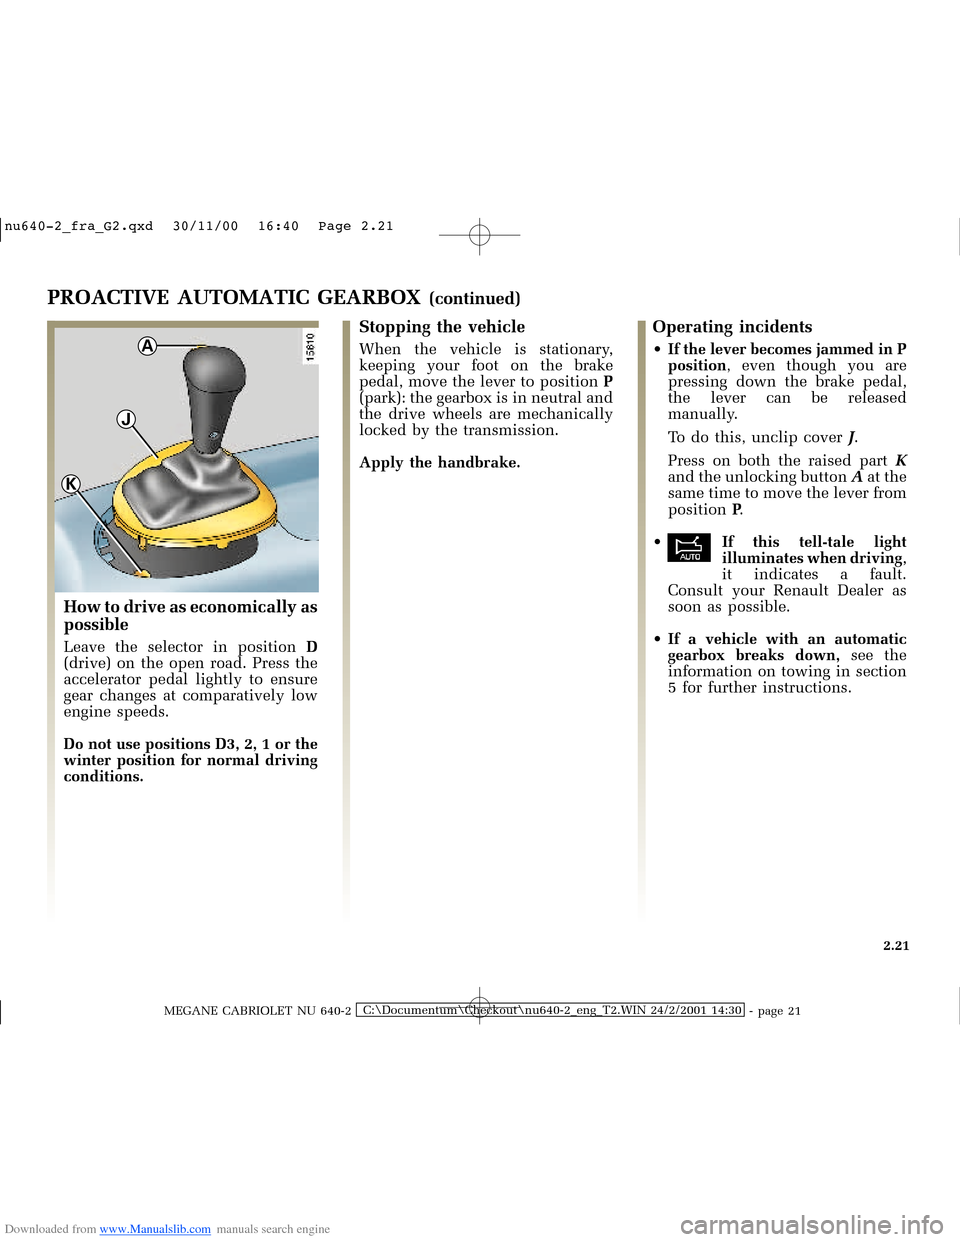 RENAULT MEGANE 2000 X64 / 1.G Owners Manual Downloaded from www.Manualslib.com manuals search engine A
J
K
�Q�X������B�I�U�D�B�*���T�[�G� � ��������� � ������ � �3�D�J�H� ����
MEGANE CABRIOLET NU 640-2C:\Documentu